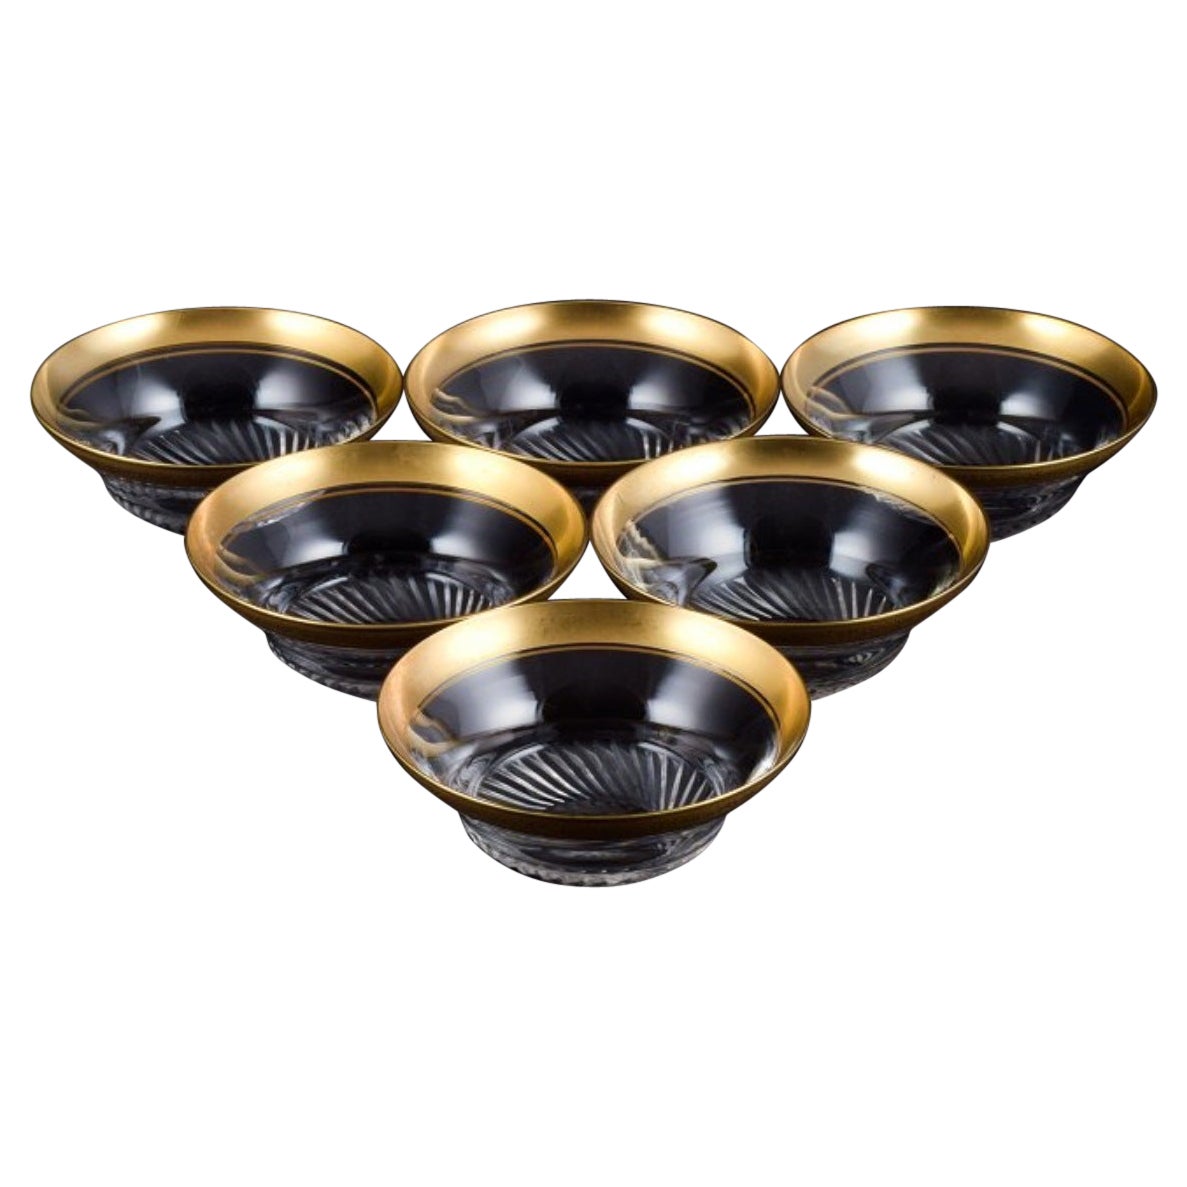 Rimpler Kristall, Zwiesel, Germany, Six Crystal Fingerbowls, 1960s For Sale